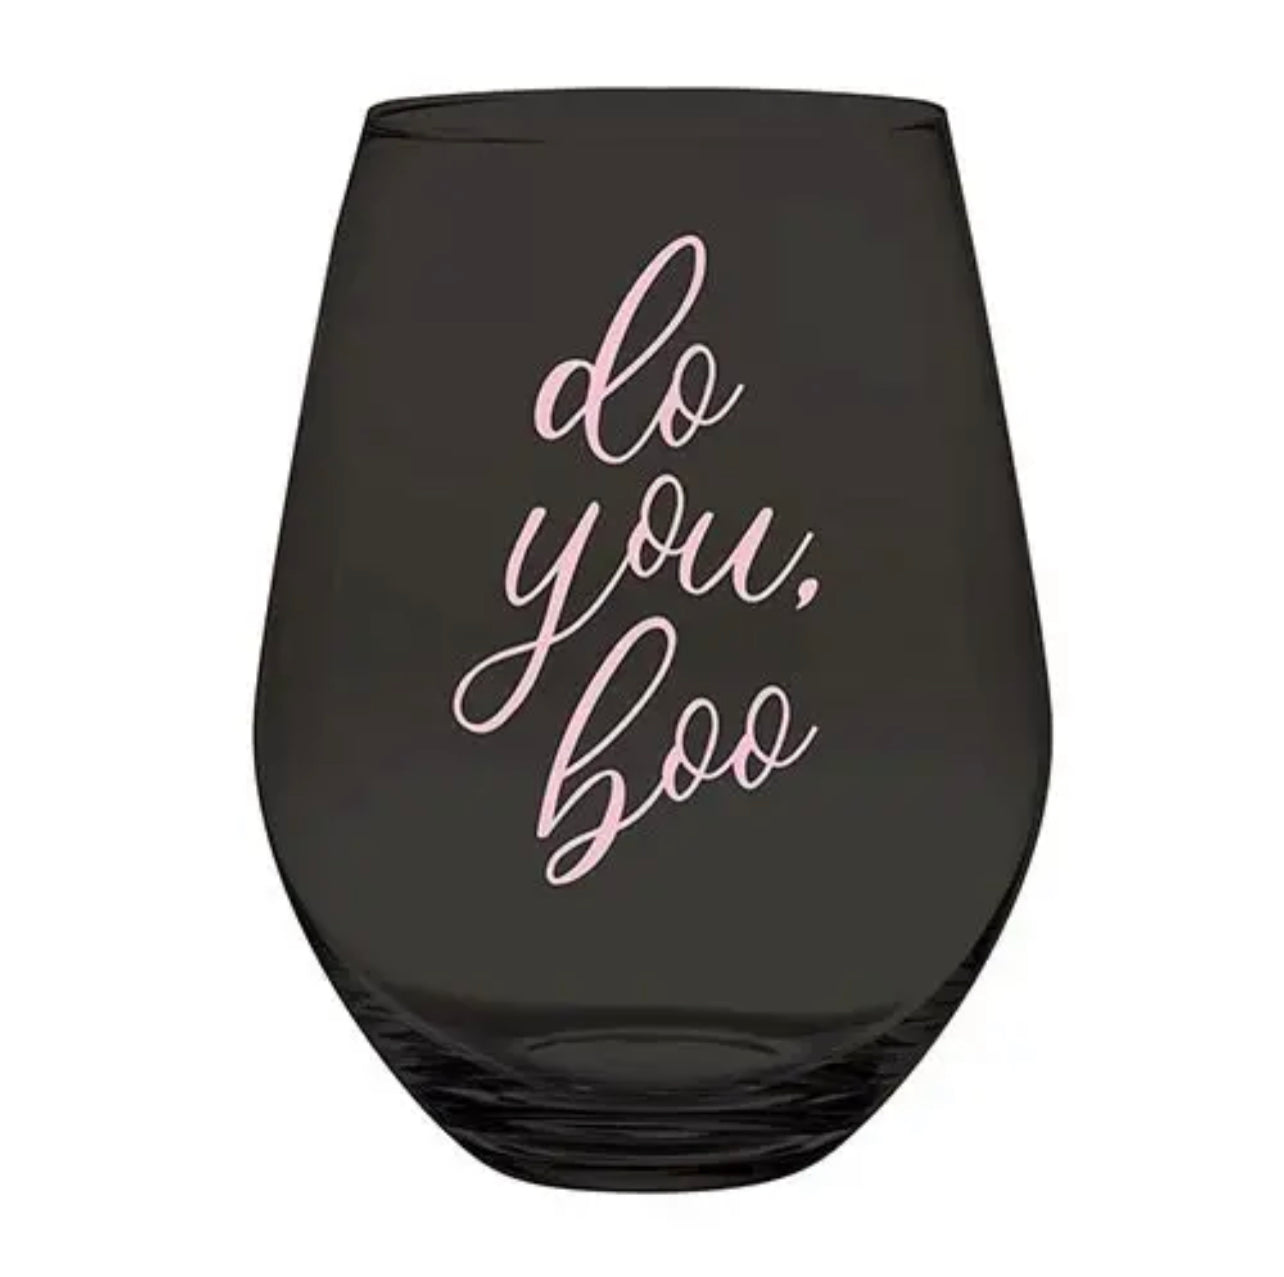 black stemless wine glass with pink flowing script that says "do you, boo"